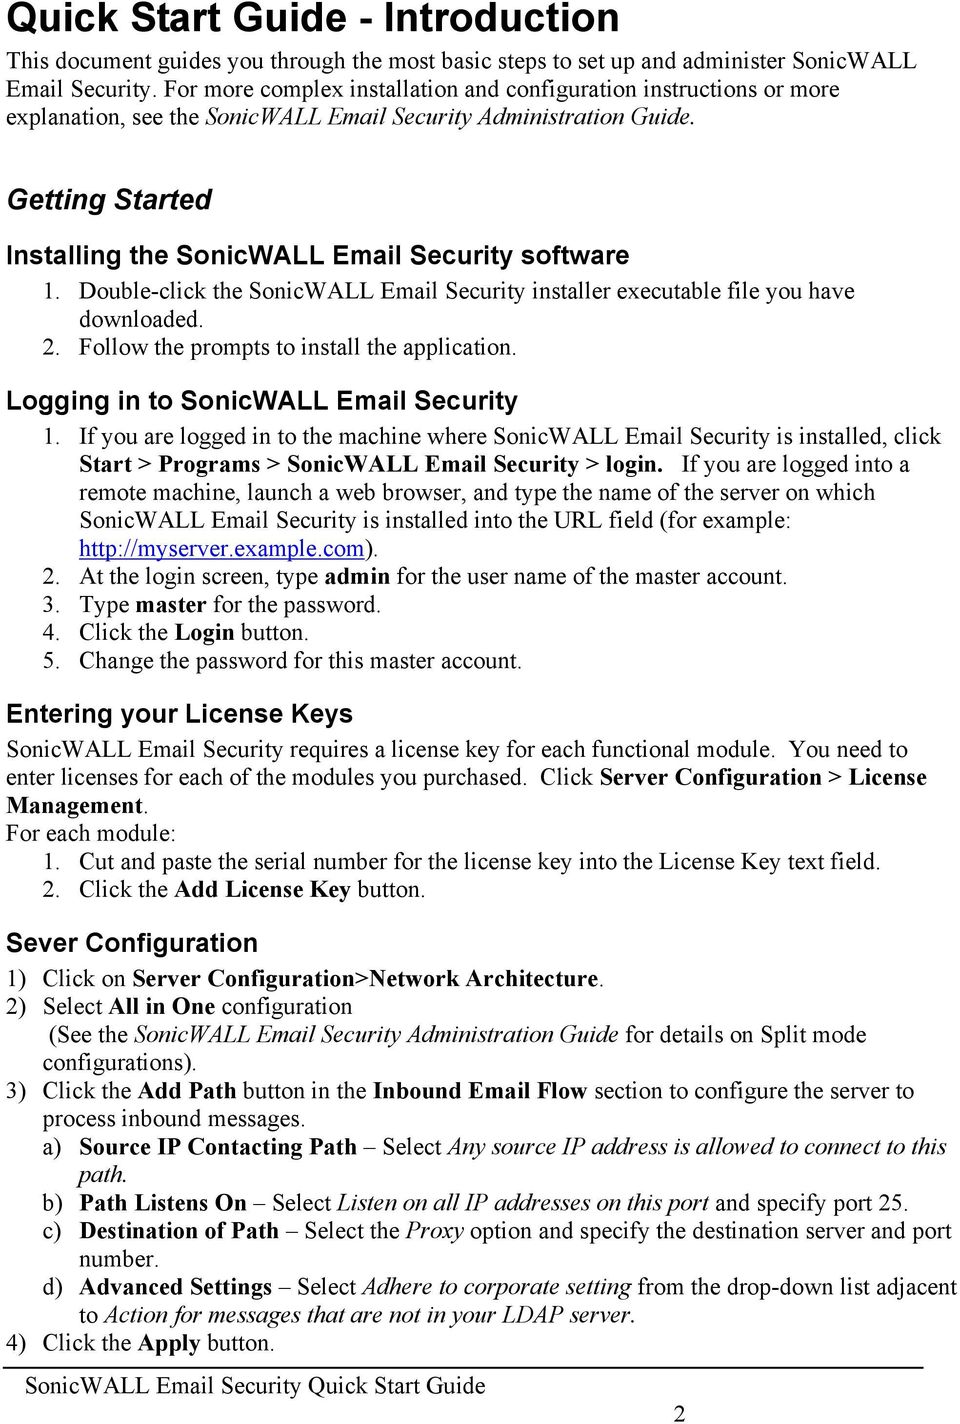 Getting Started Installing the SonicWALL Email Security software 1. Double-click the SonicWALL Email Security installer executable file you have downloaded. 2.